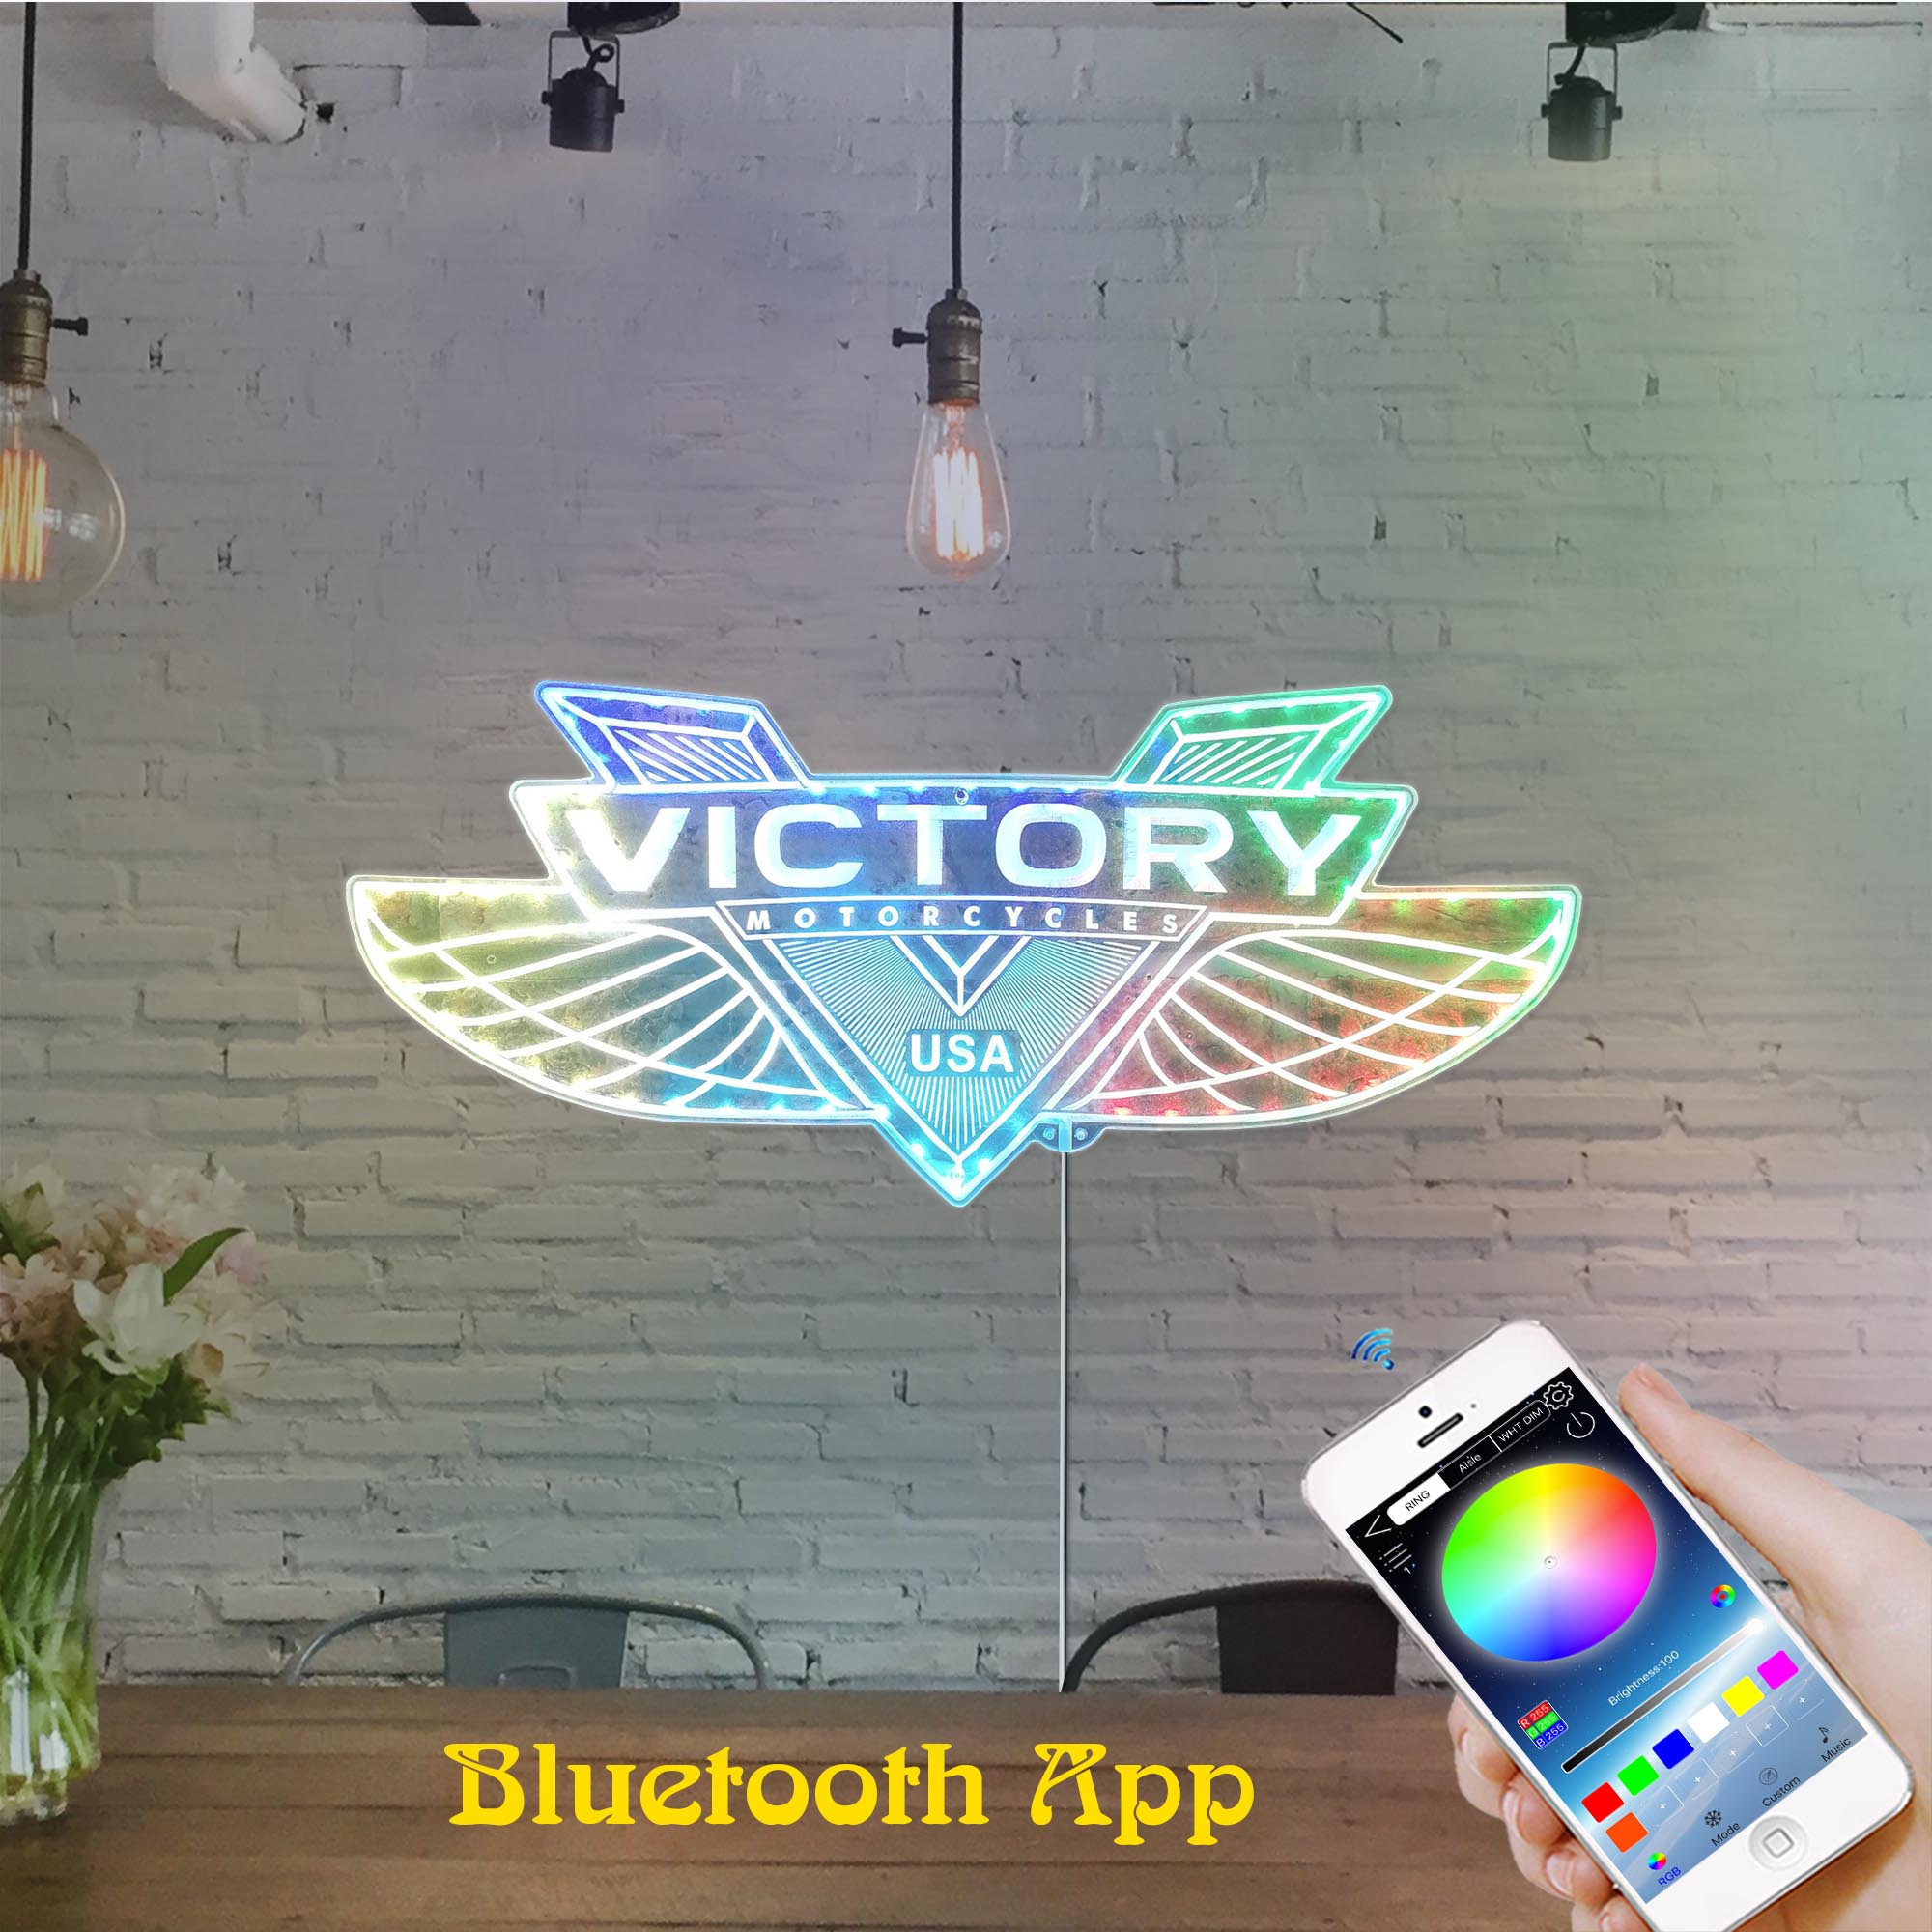 Victory Motorcycles Dynamic RGB Edge Lit LED Sign